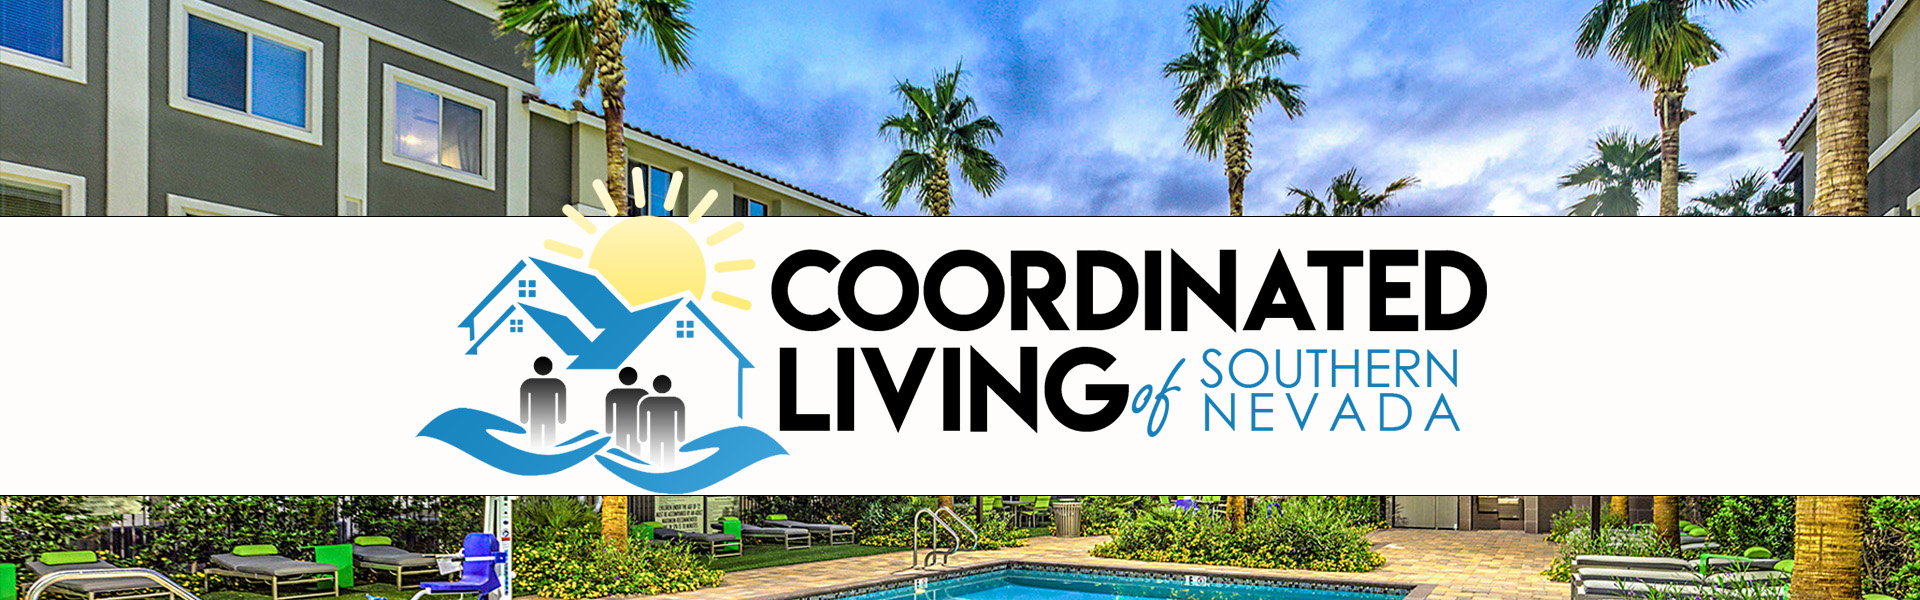 Affordable housing & supportive services to senior residents ages 55+ | Coordinated Living of Southern Nevada